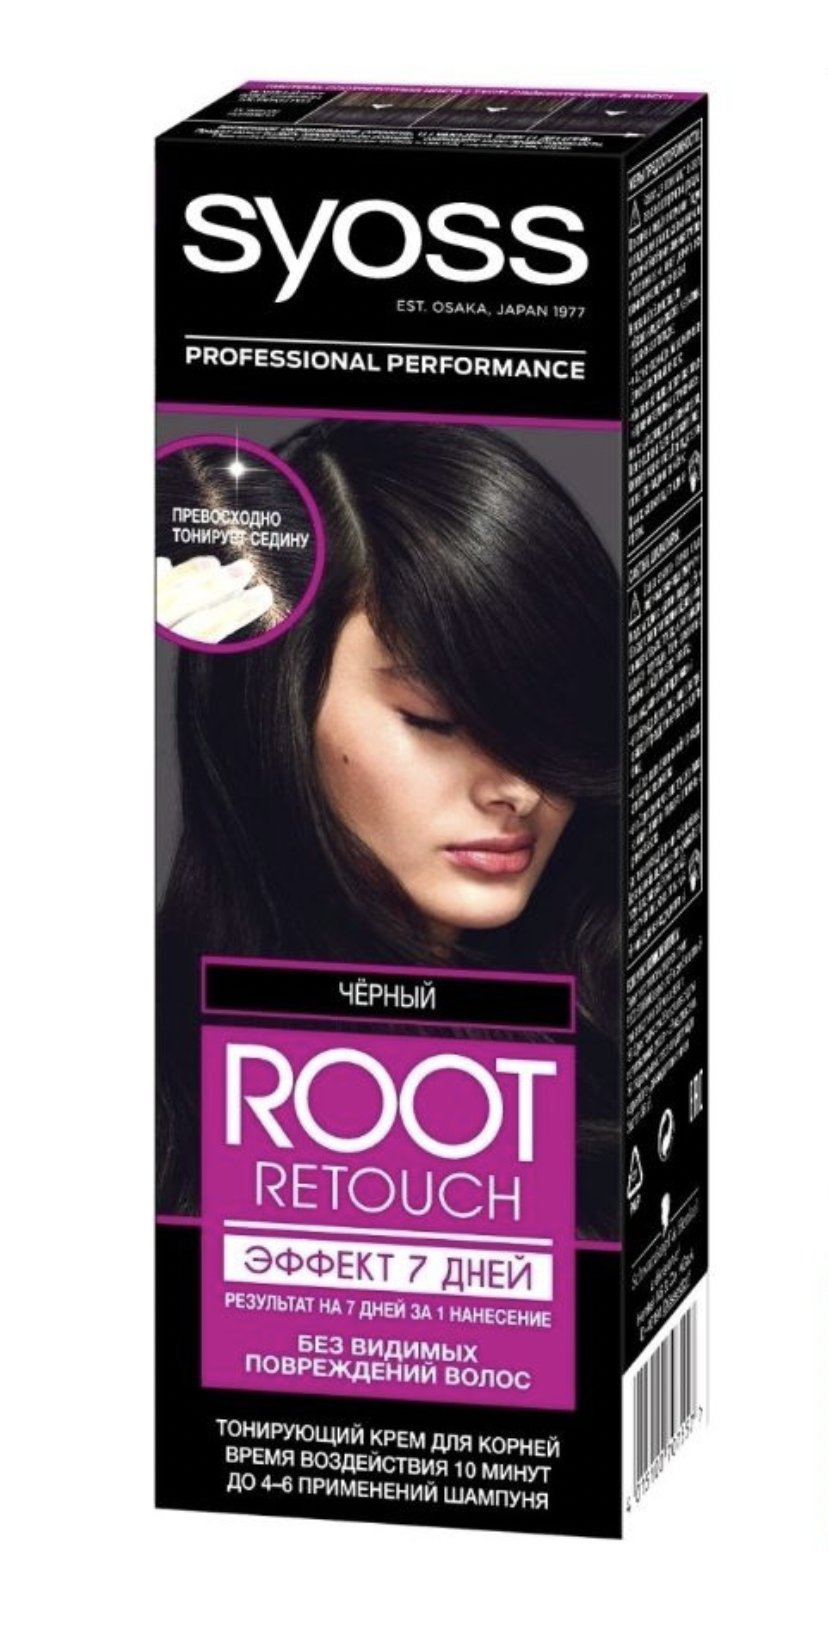   / Syoss Root Retouch - -     60 